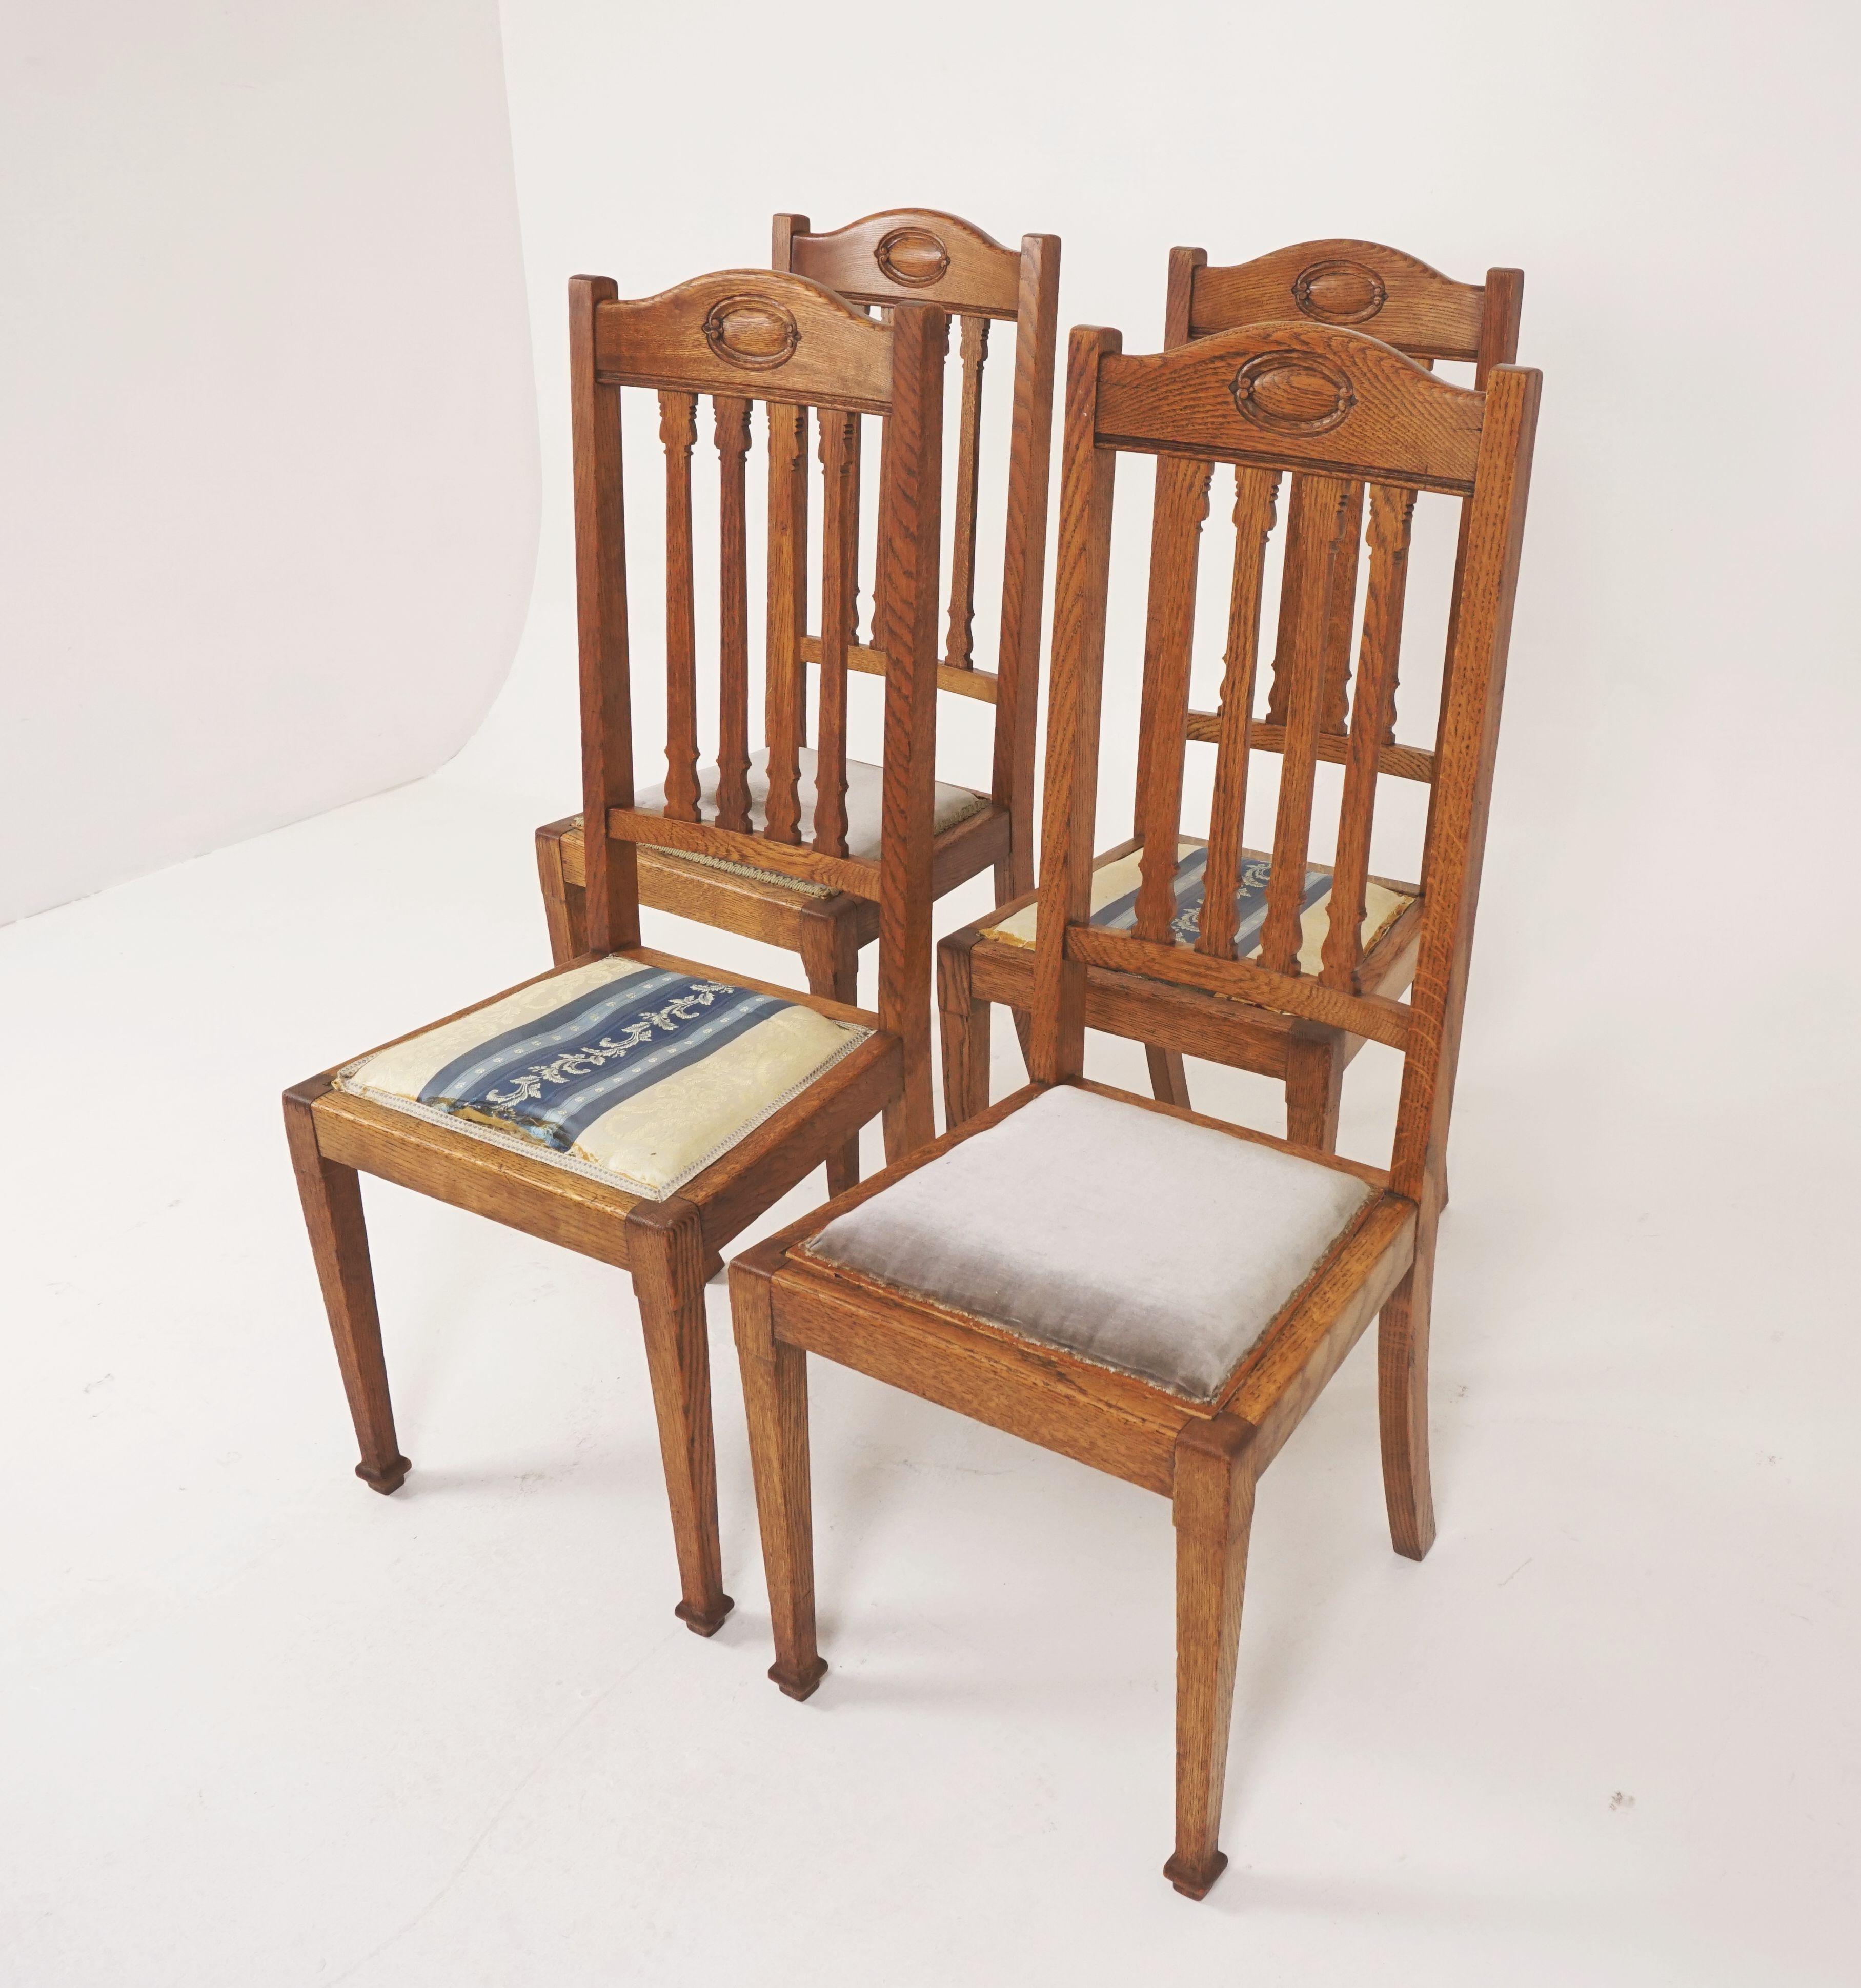 4 antique dining chairs, oak Arts & Crafts Chairs, Scotland 1910, H166

Scotland, 1910
Solid oak
Original finish
Arched top rail with incised roundels
Four shaped vertical splats underneath
Padded seats
All standing on square tapering legs with